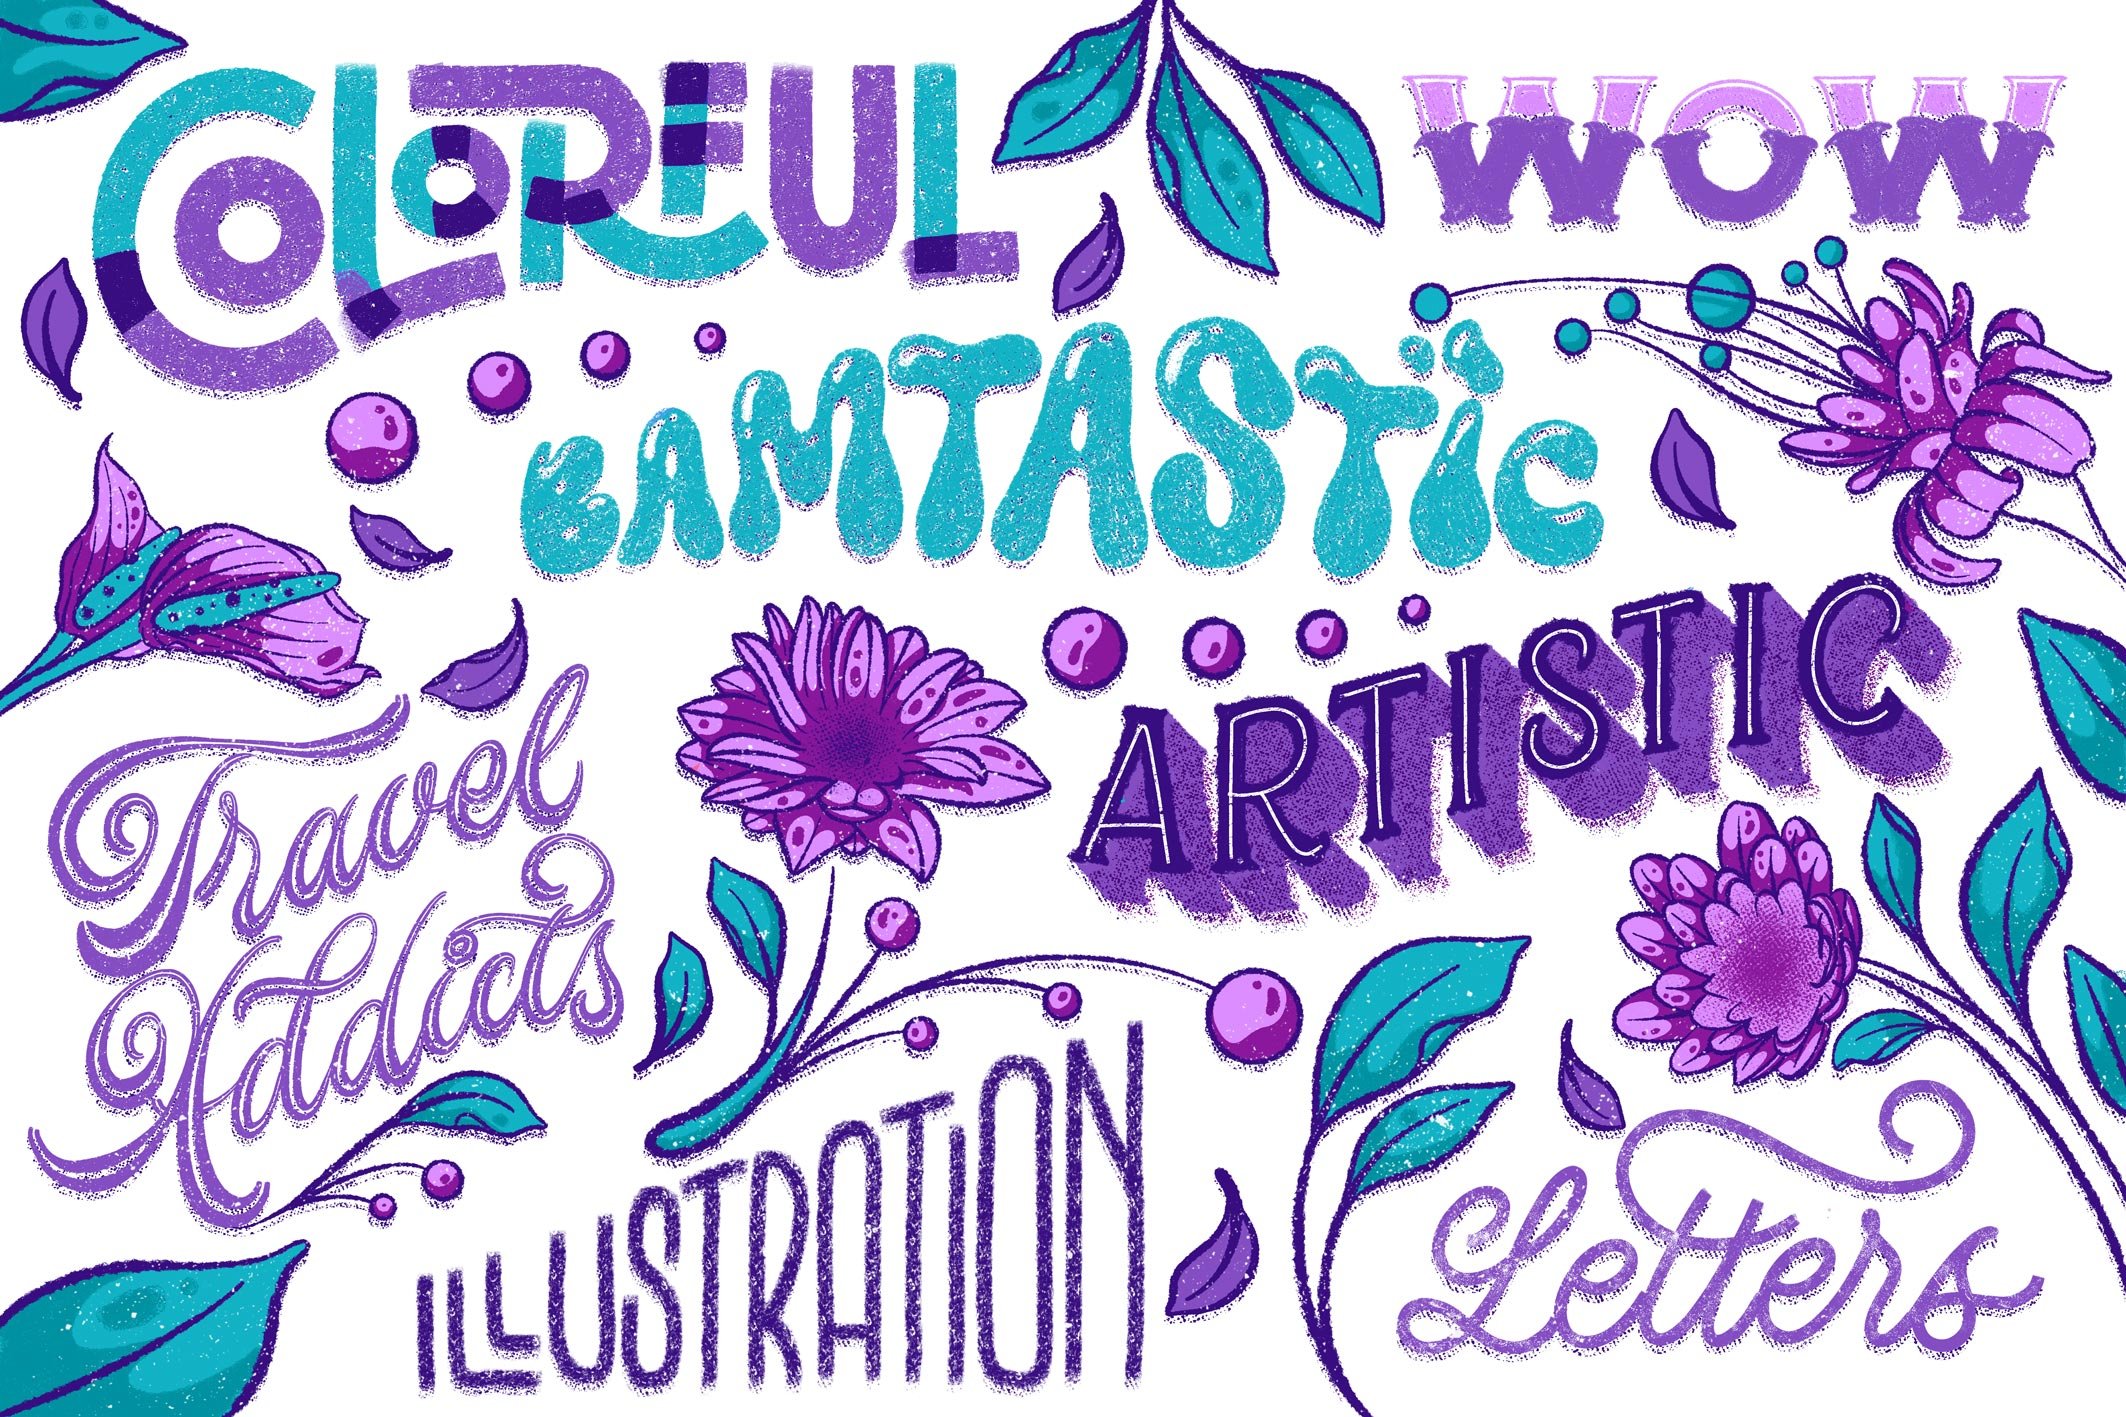 Affinity Lettering design with flourishes